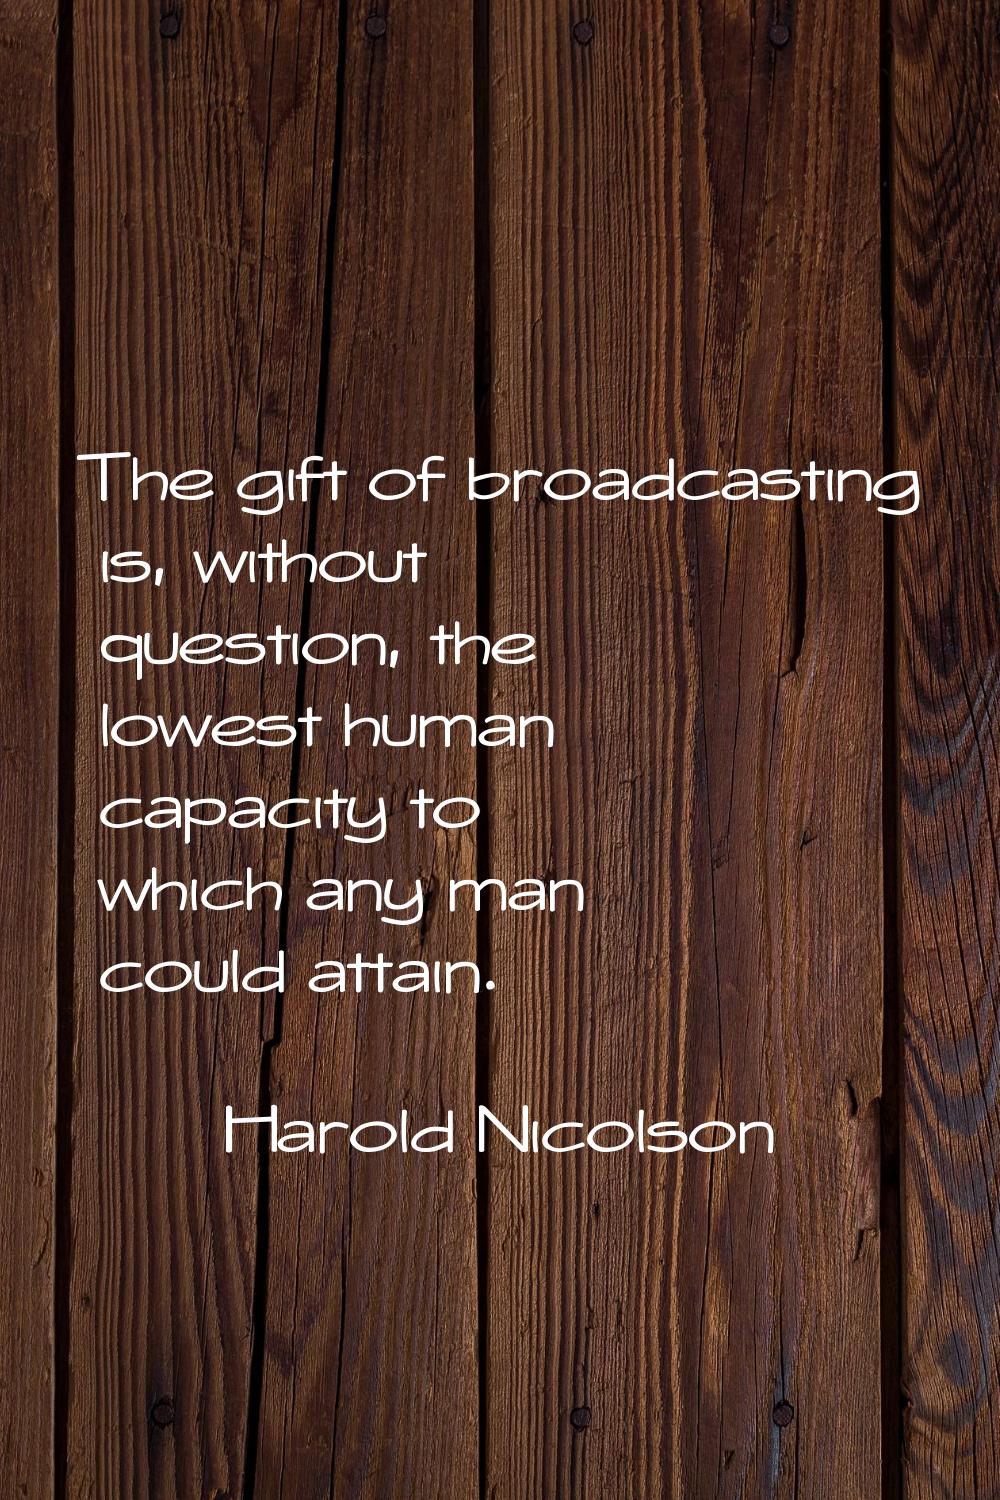 The gift of broadcasting is, without question, the lowest human capacity to which any man could att